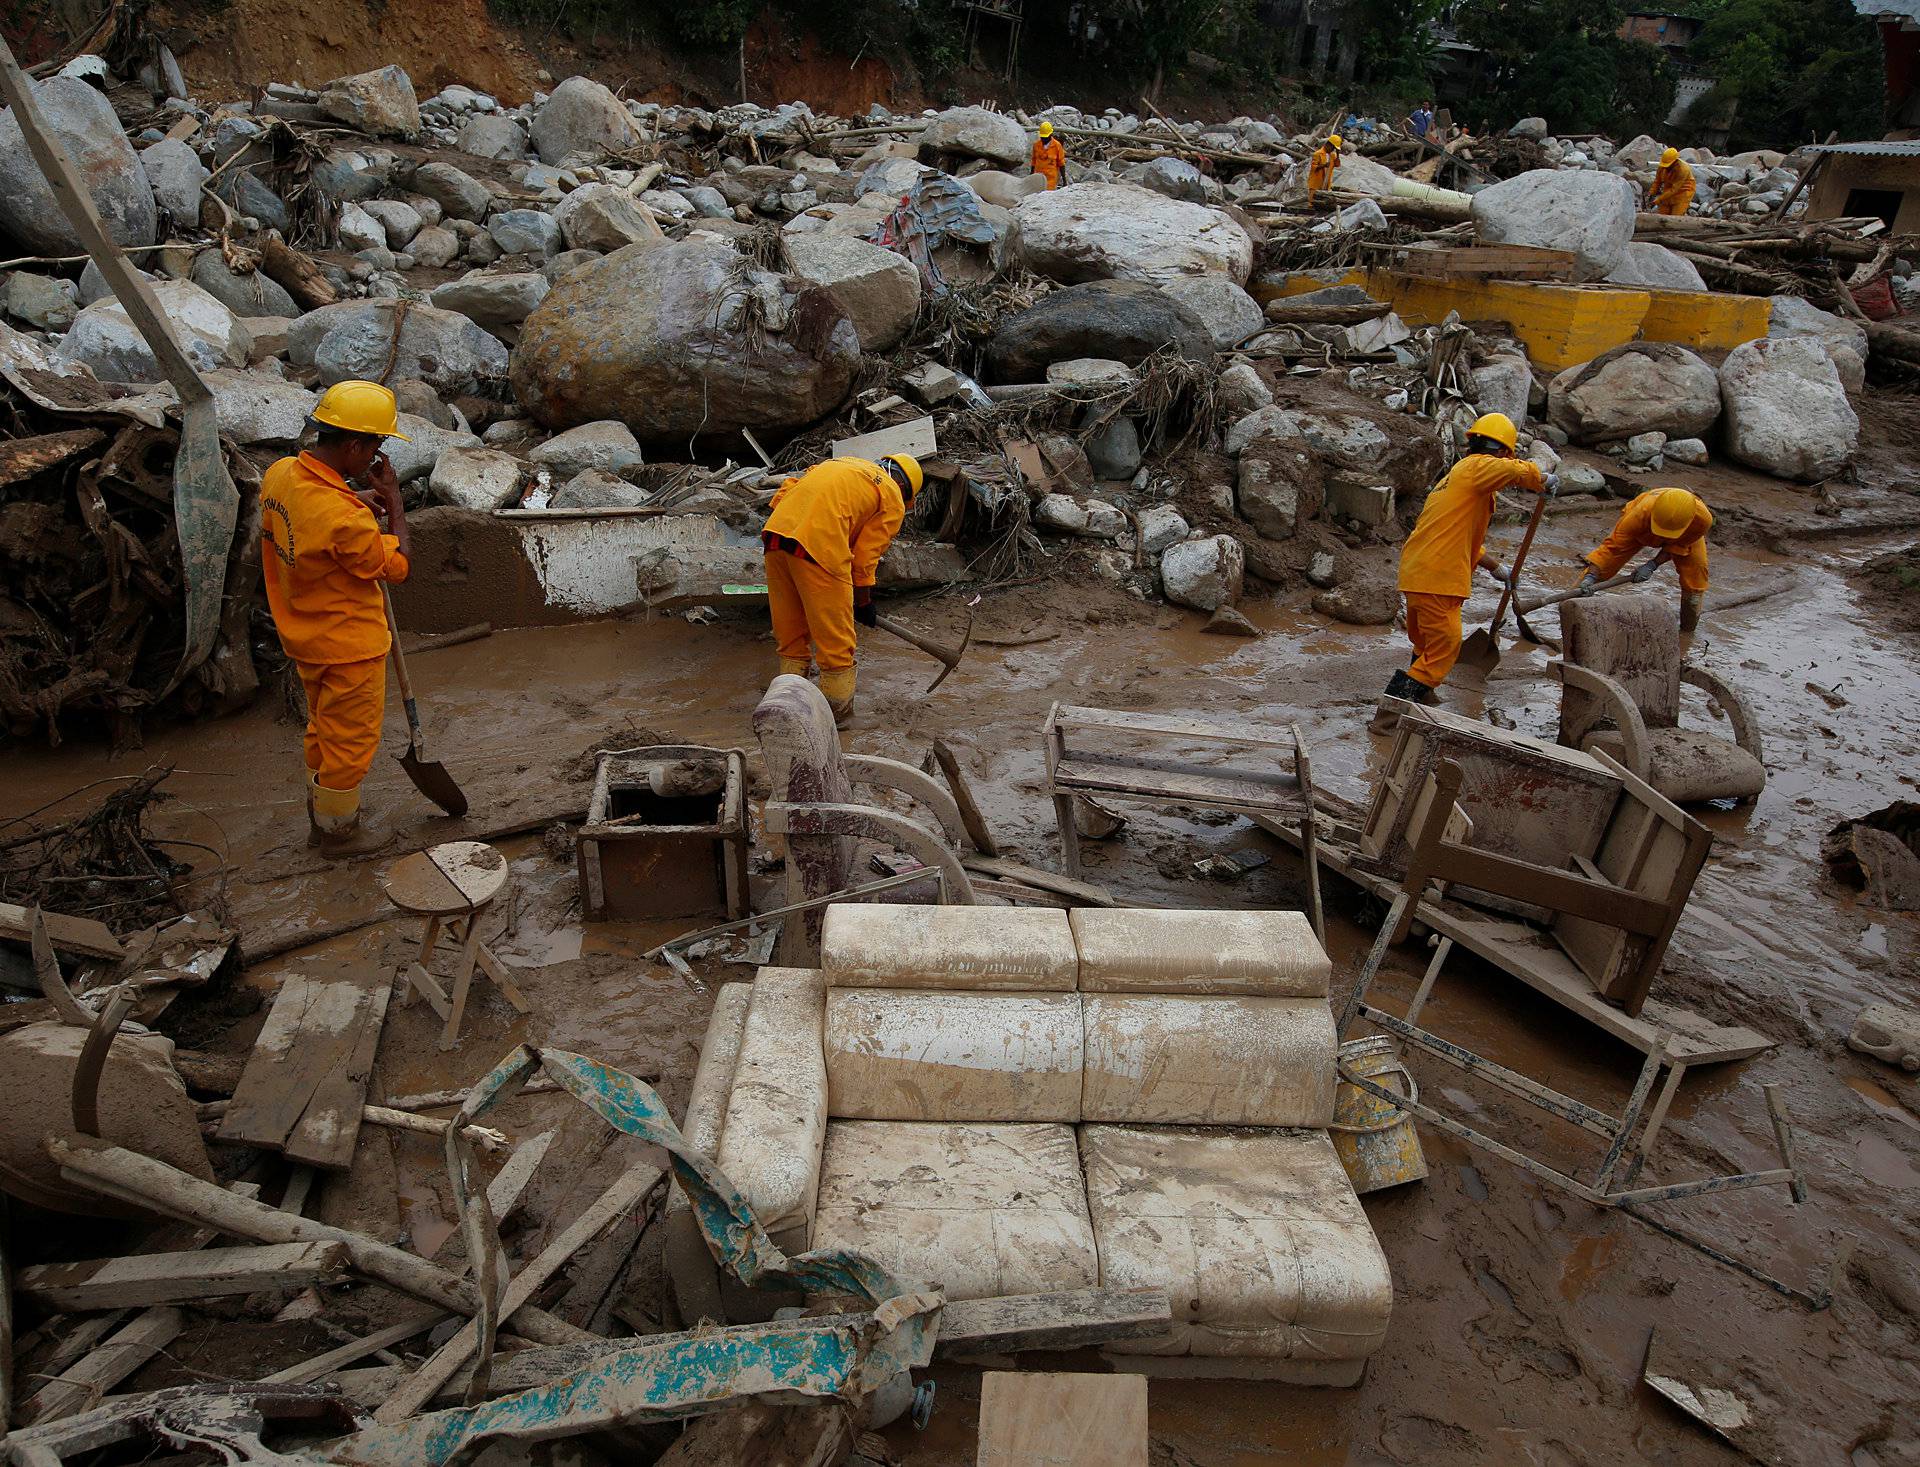 Rescuers look for bodies in a destroyed area, after flooding and mudslides caused by heavy rains leading several rivers to overflow, pushing sediment and rocks into buildings and roads, in Mocoa